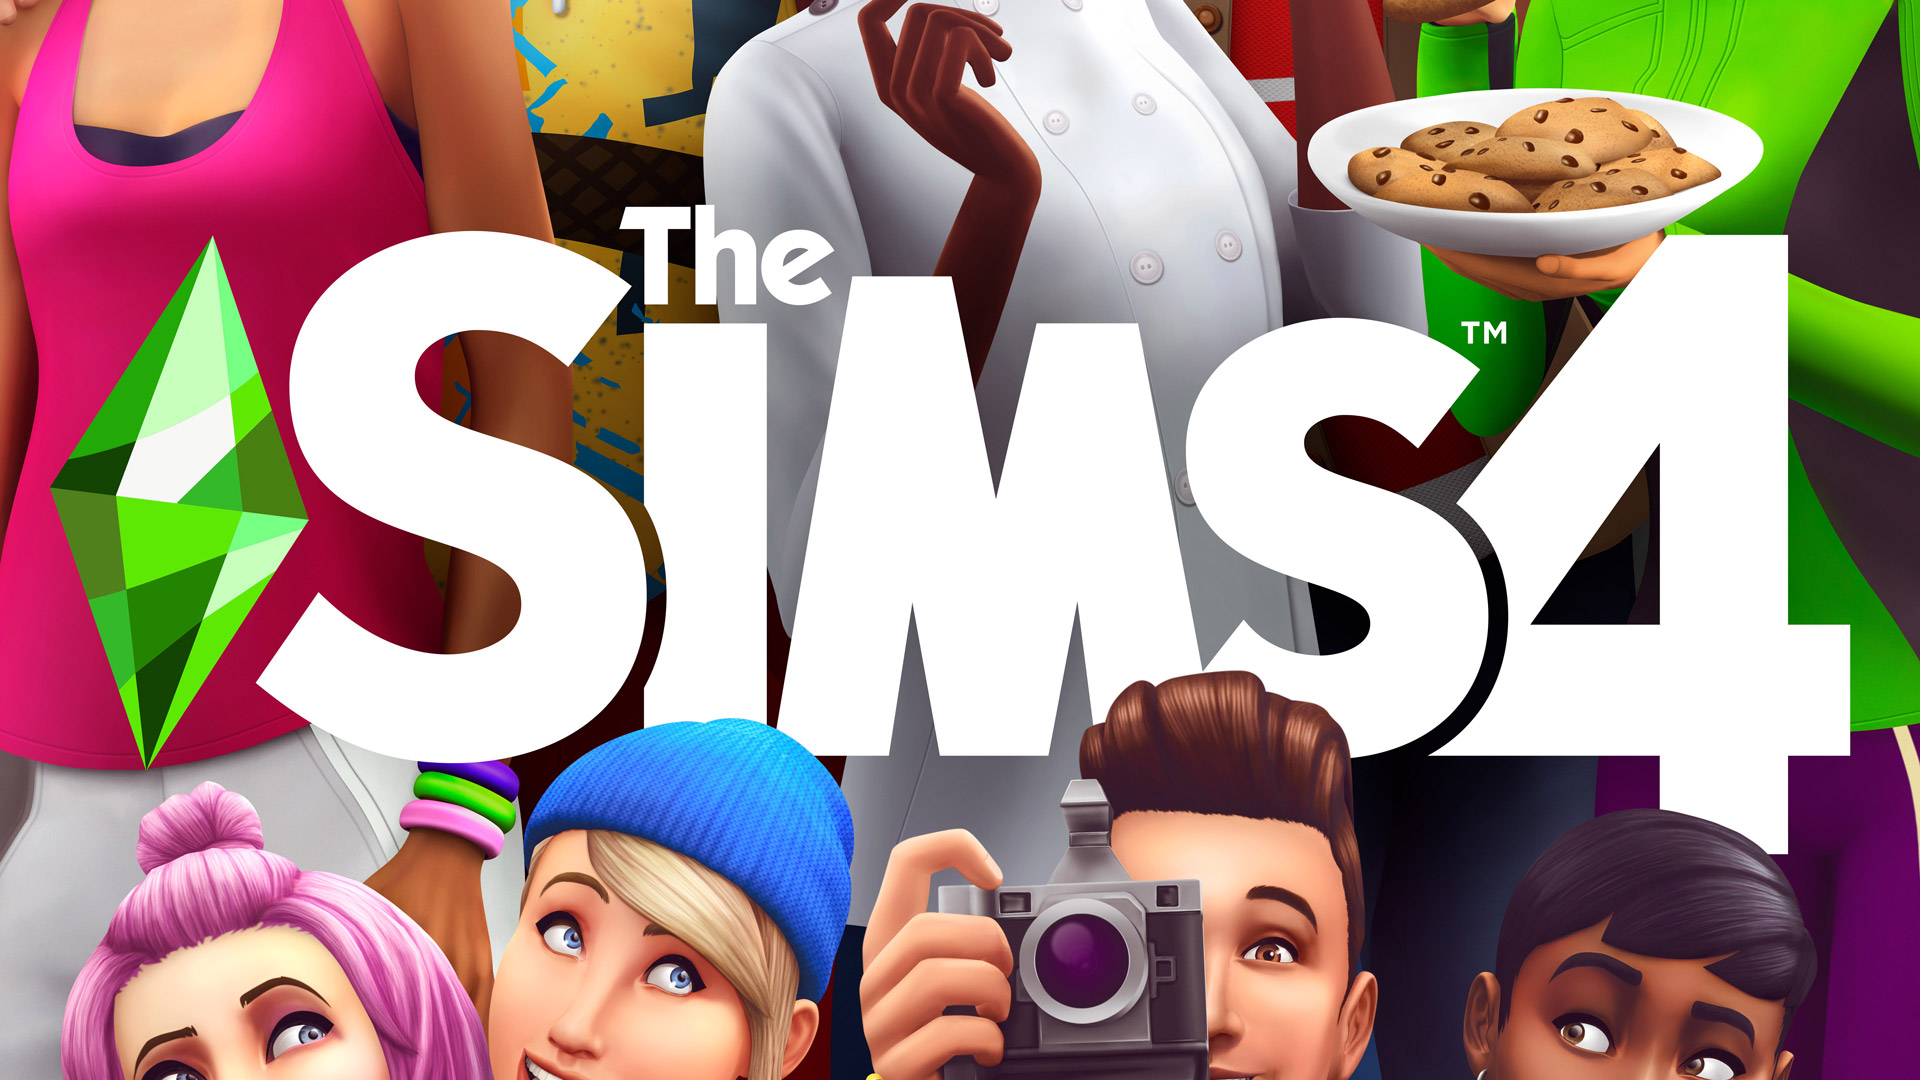 The sims 4 steam price фото 95